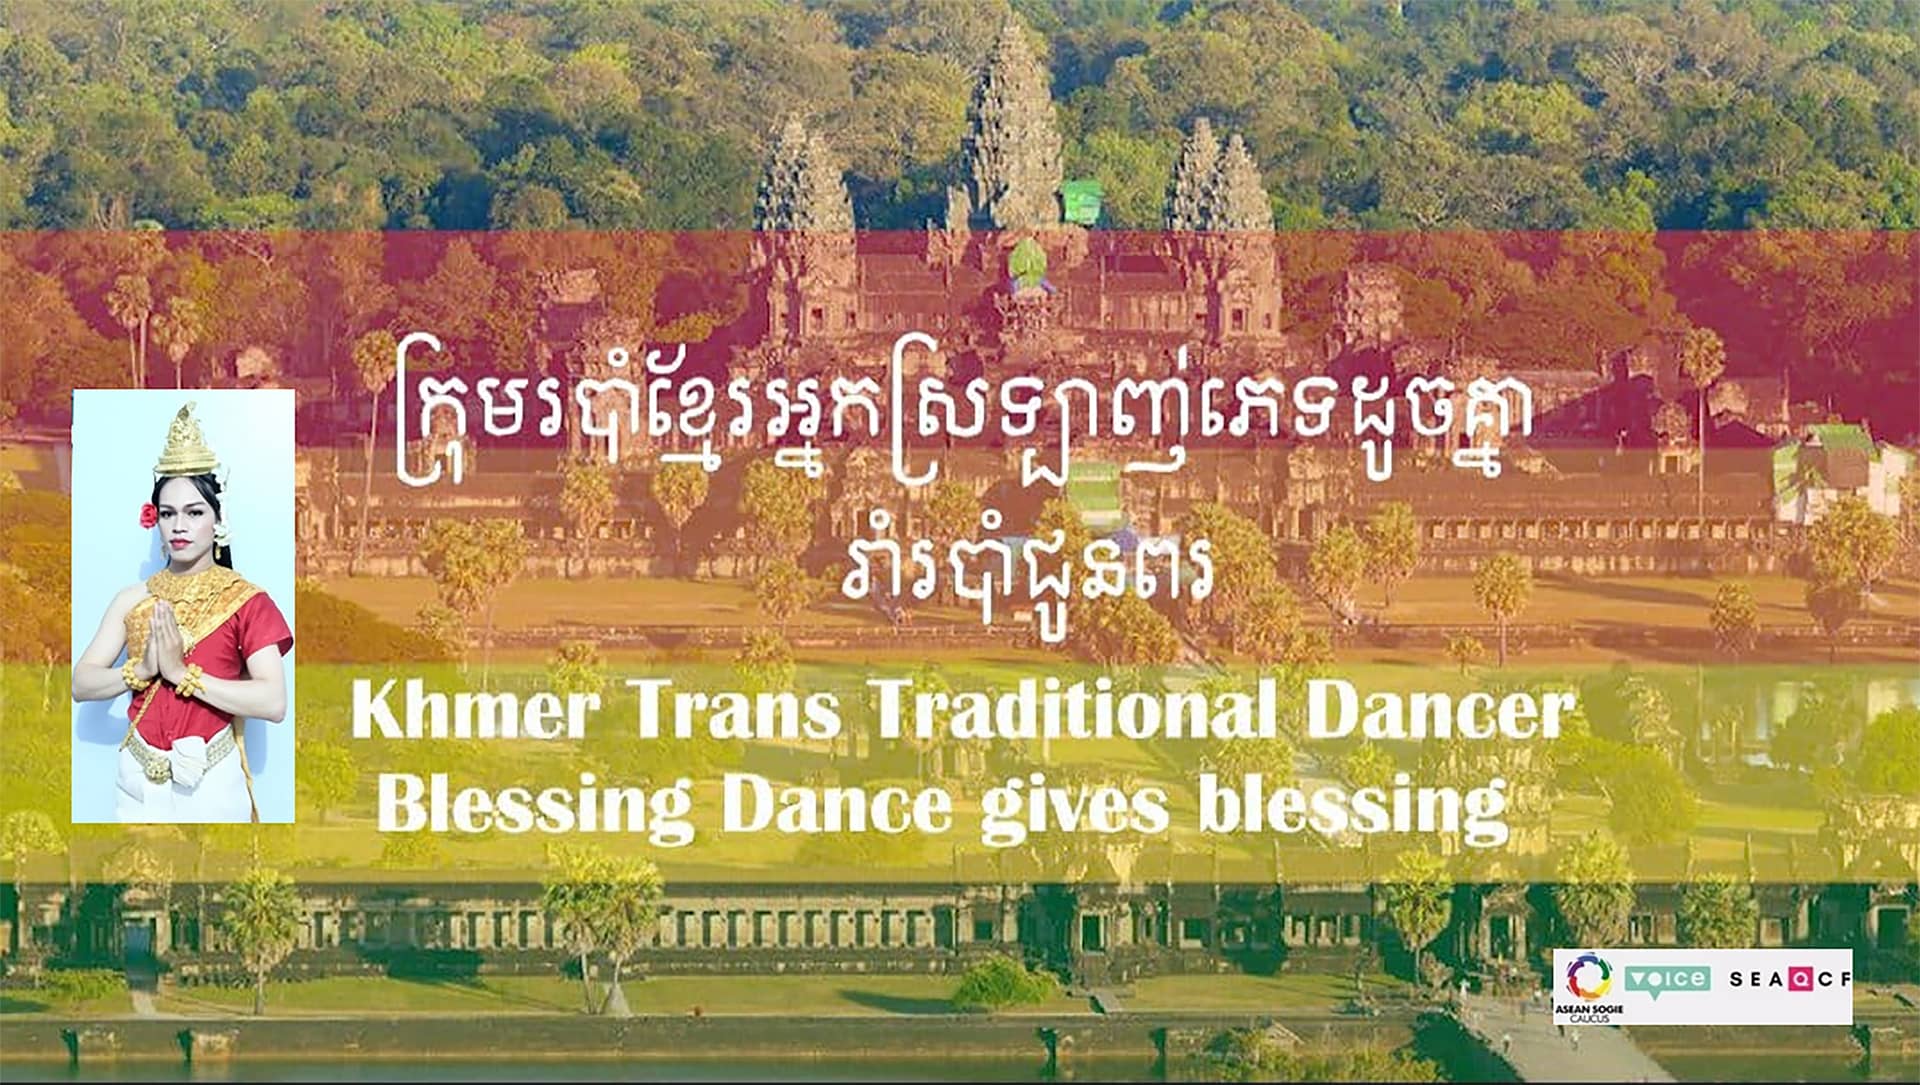 Khmer Trans Traditional Dance Poster, an ancient Khmer temple, with a photo of a transgender person in traditional dancing attire